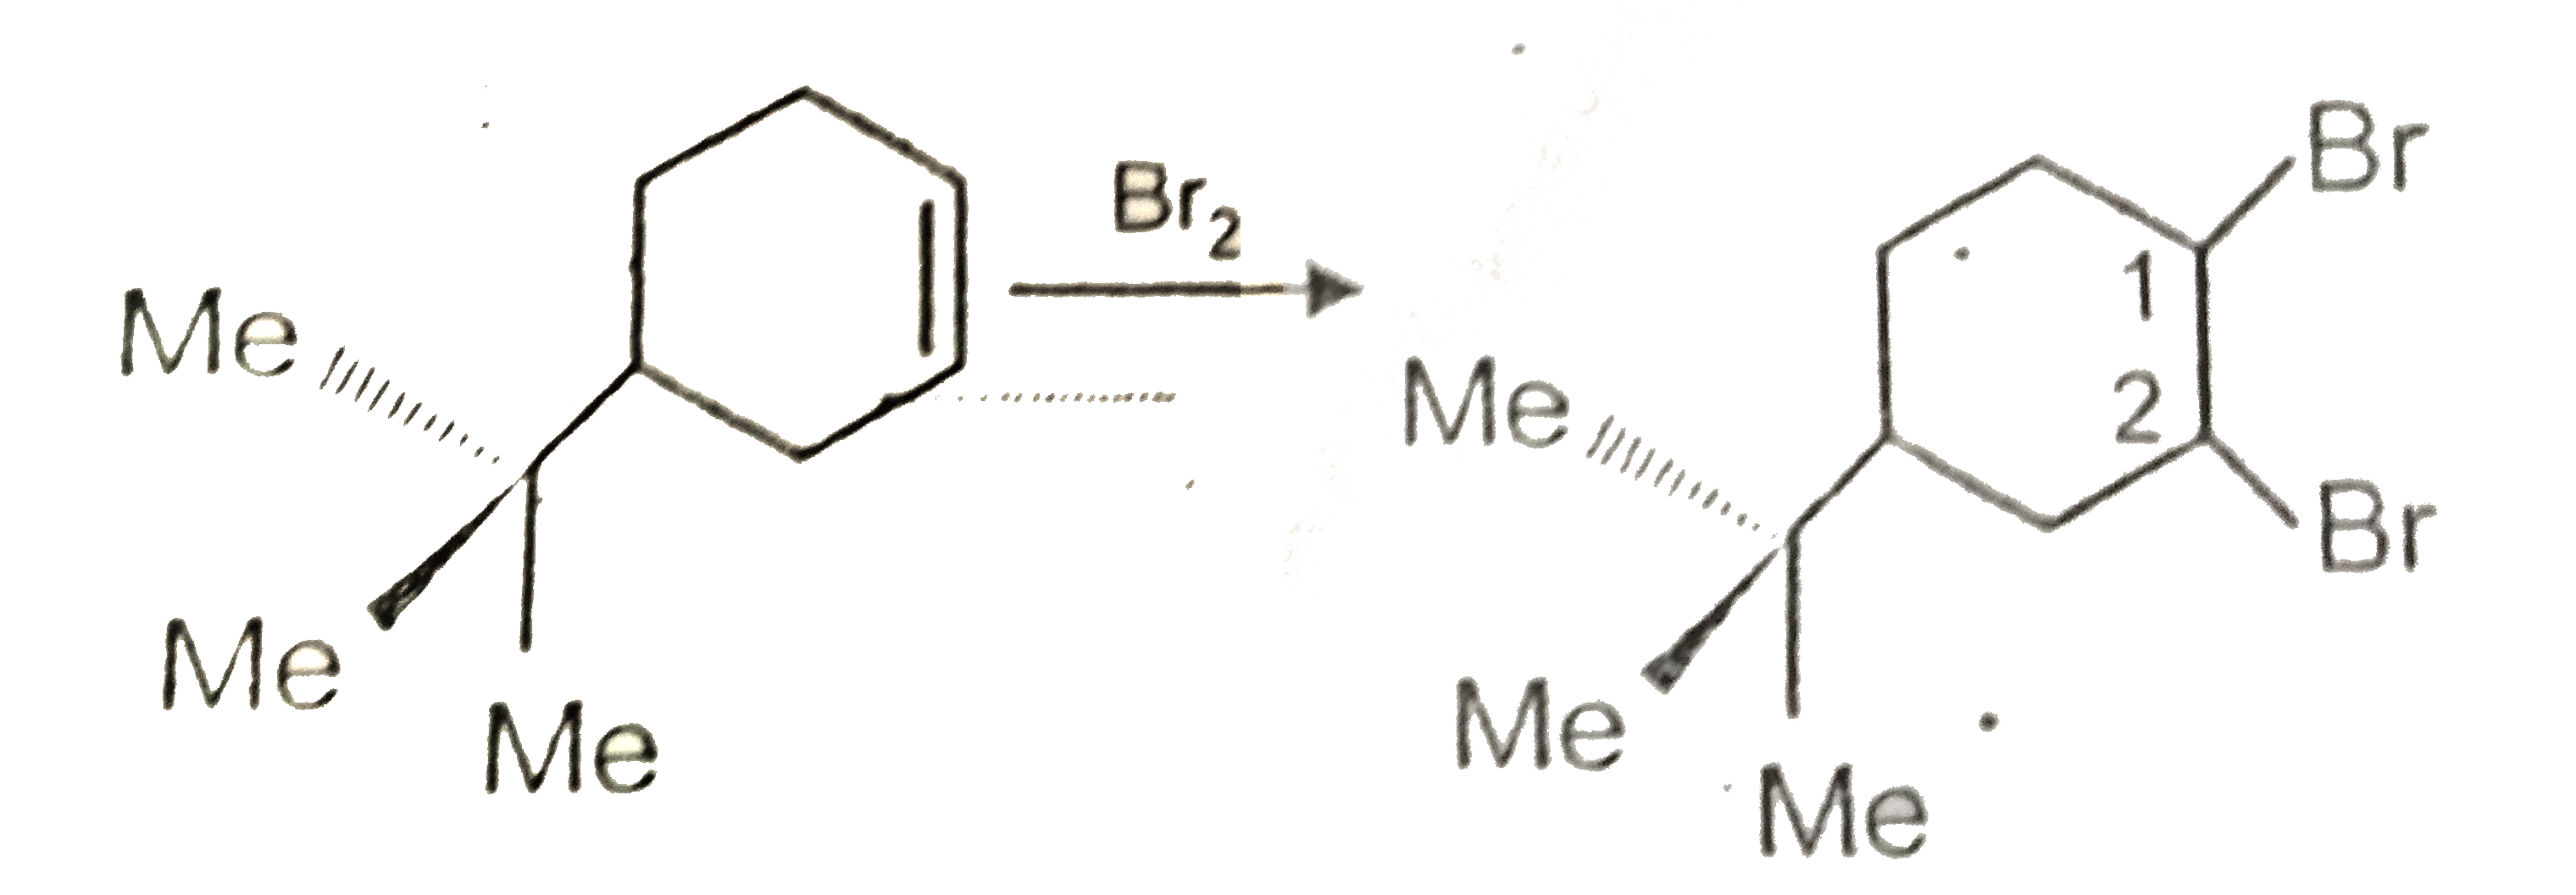 In the   reaction  given  below , the   orientation  of two  bromine substituents  in the   product  is      (1) Equitorial  at both  C-1 and C-2   (2) Axial  at both  C-1 and C-2   (3 ) Equitorial  at C-1  and axial  at C-2   (4) Axial  at C-1  and equitorial  at C-2